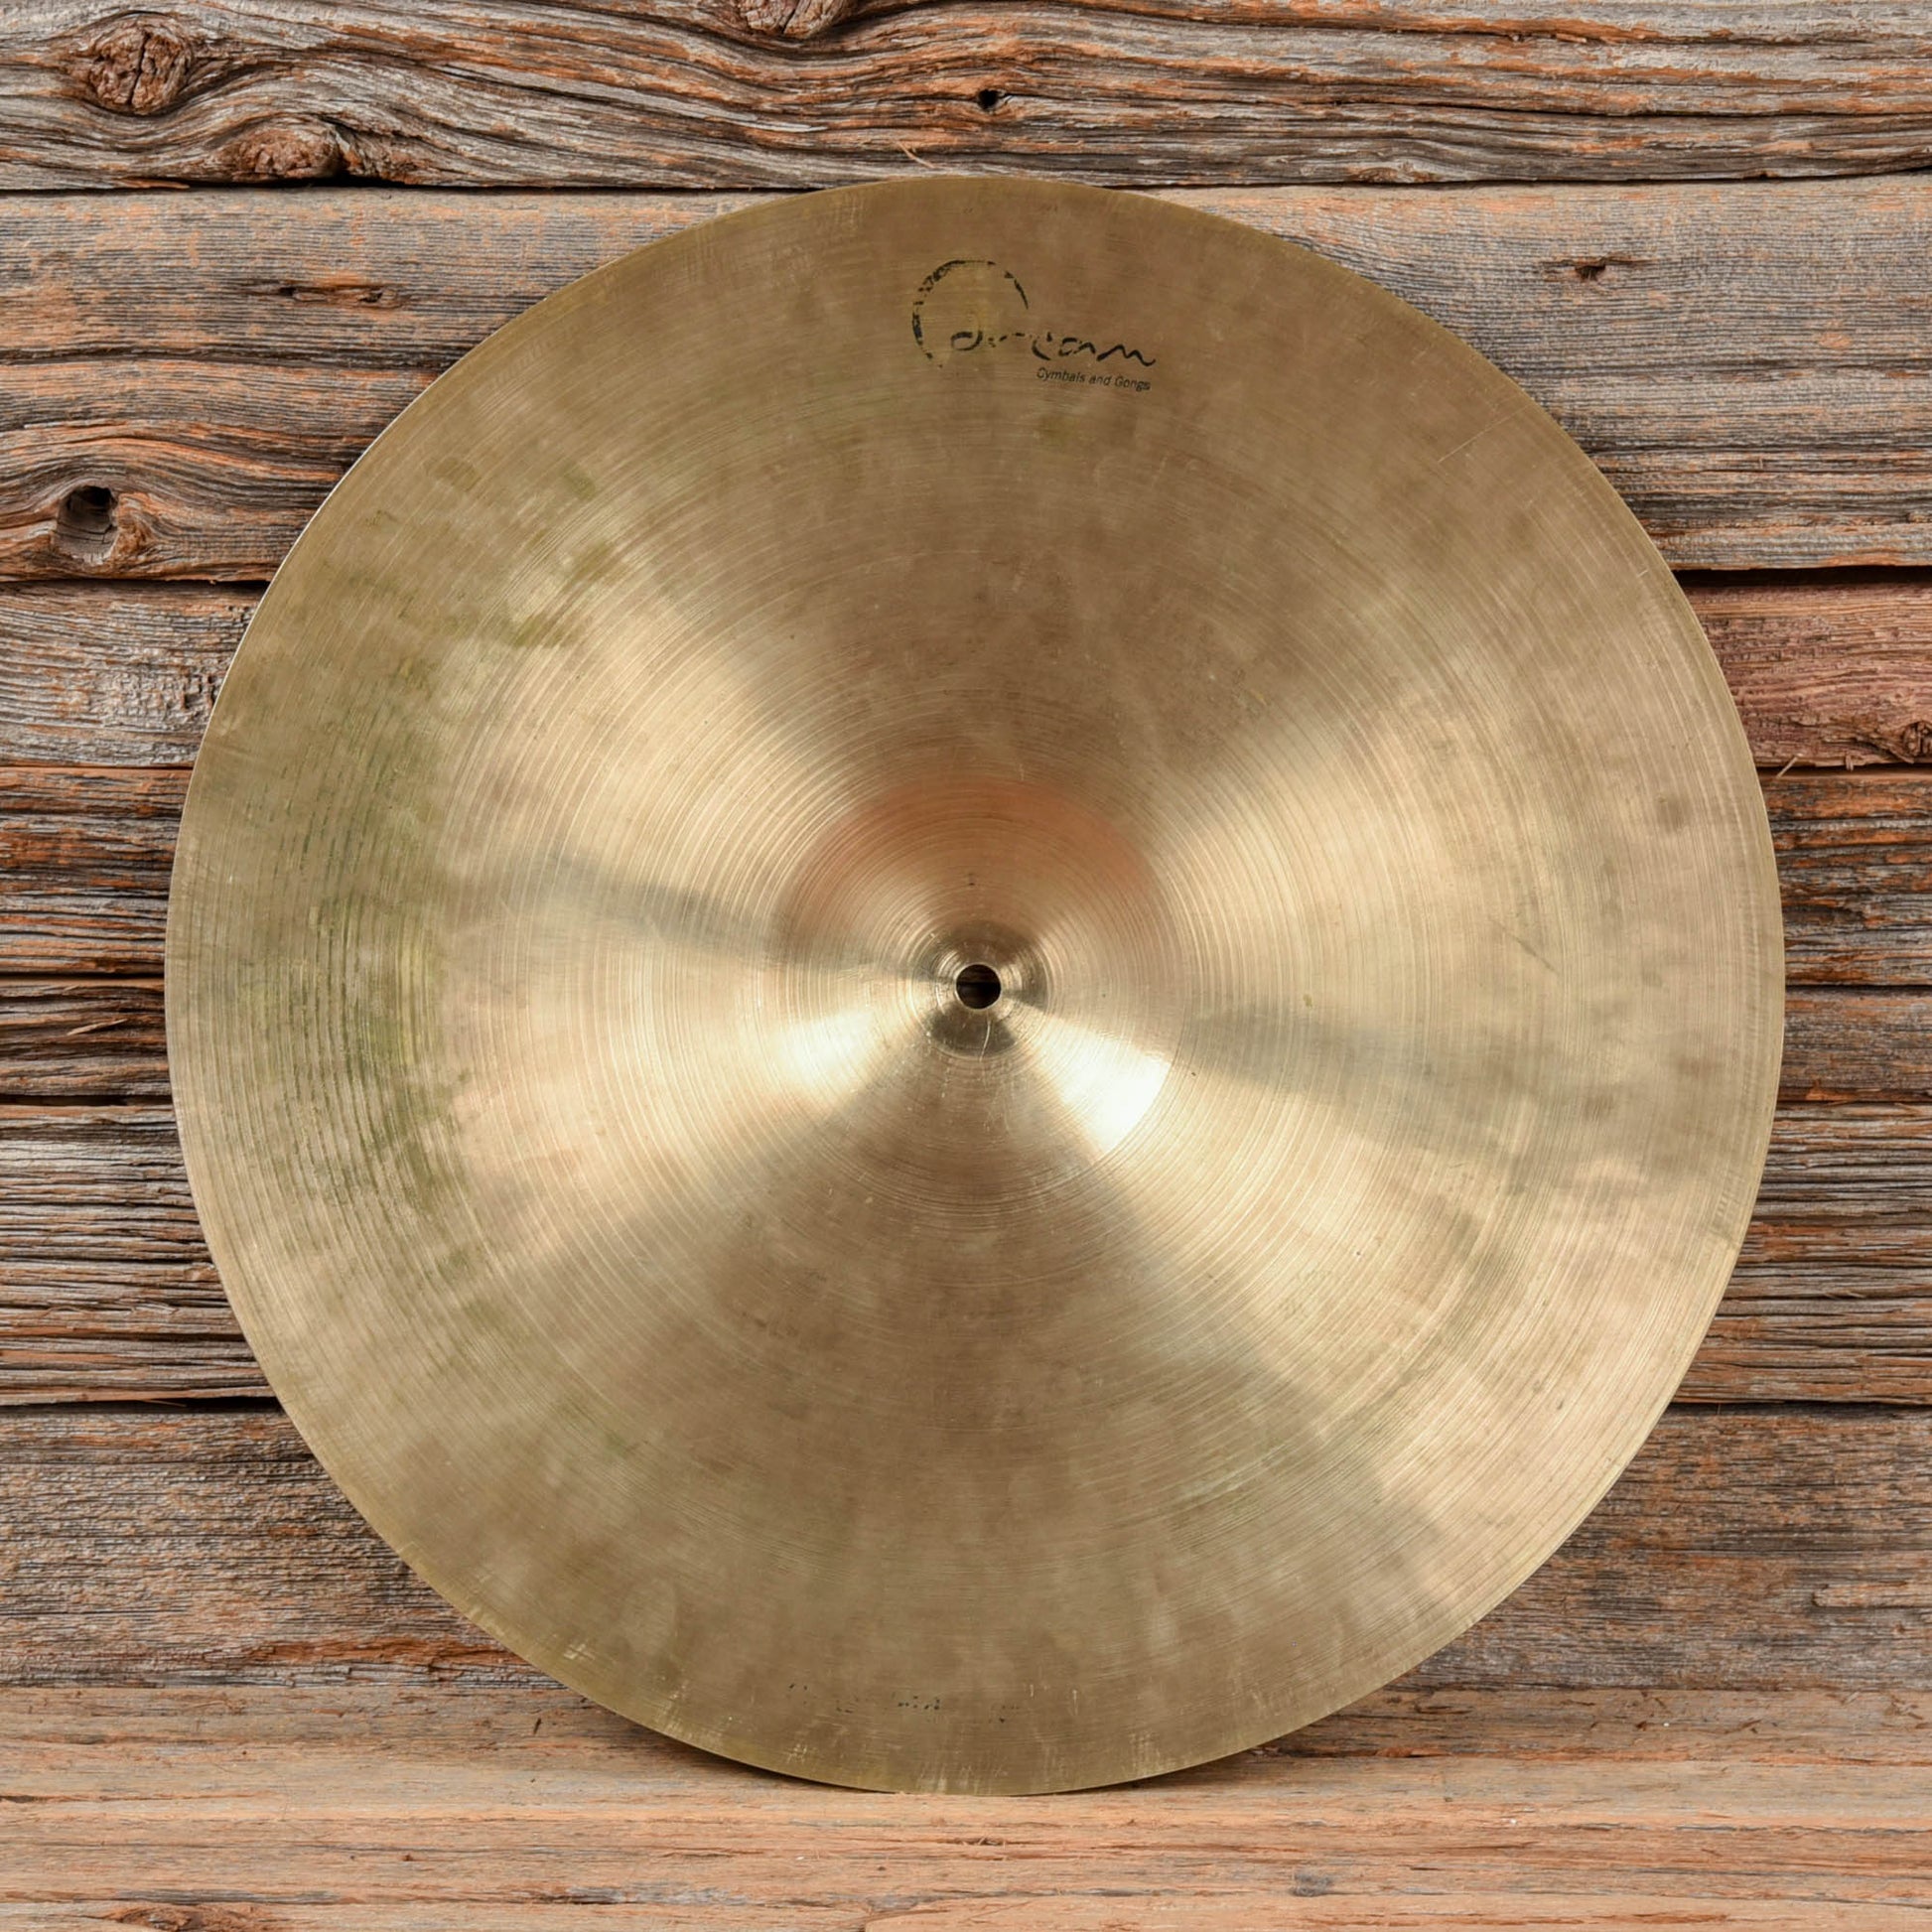 Dream 18" Contact Crash Ride Cymbal USED Drums and Percussion